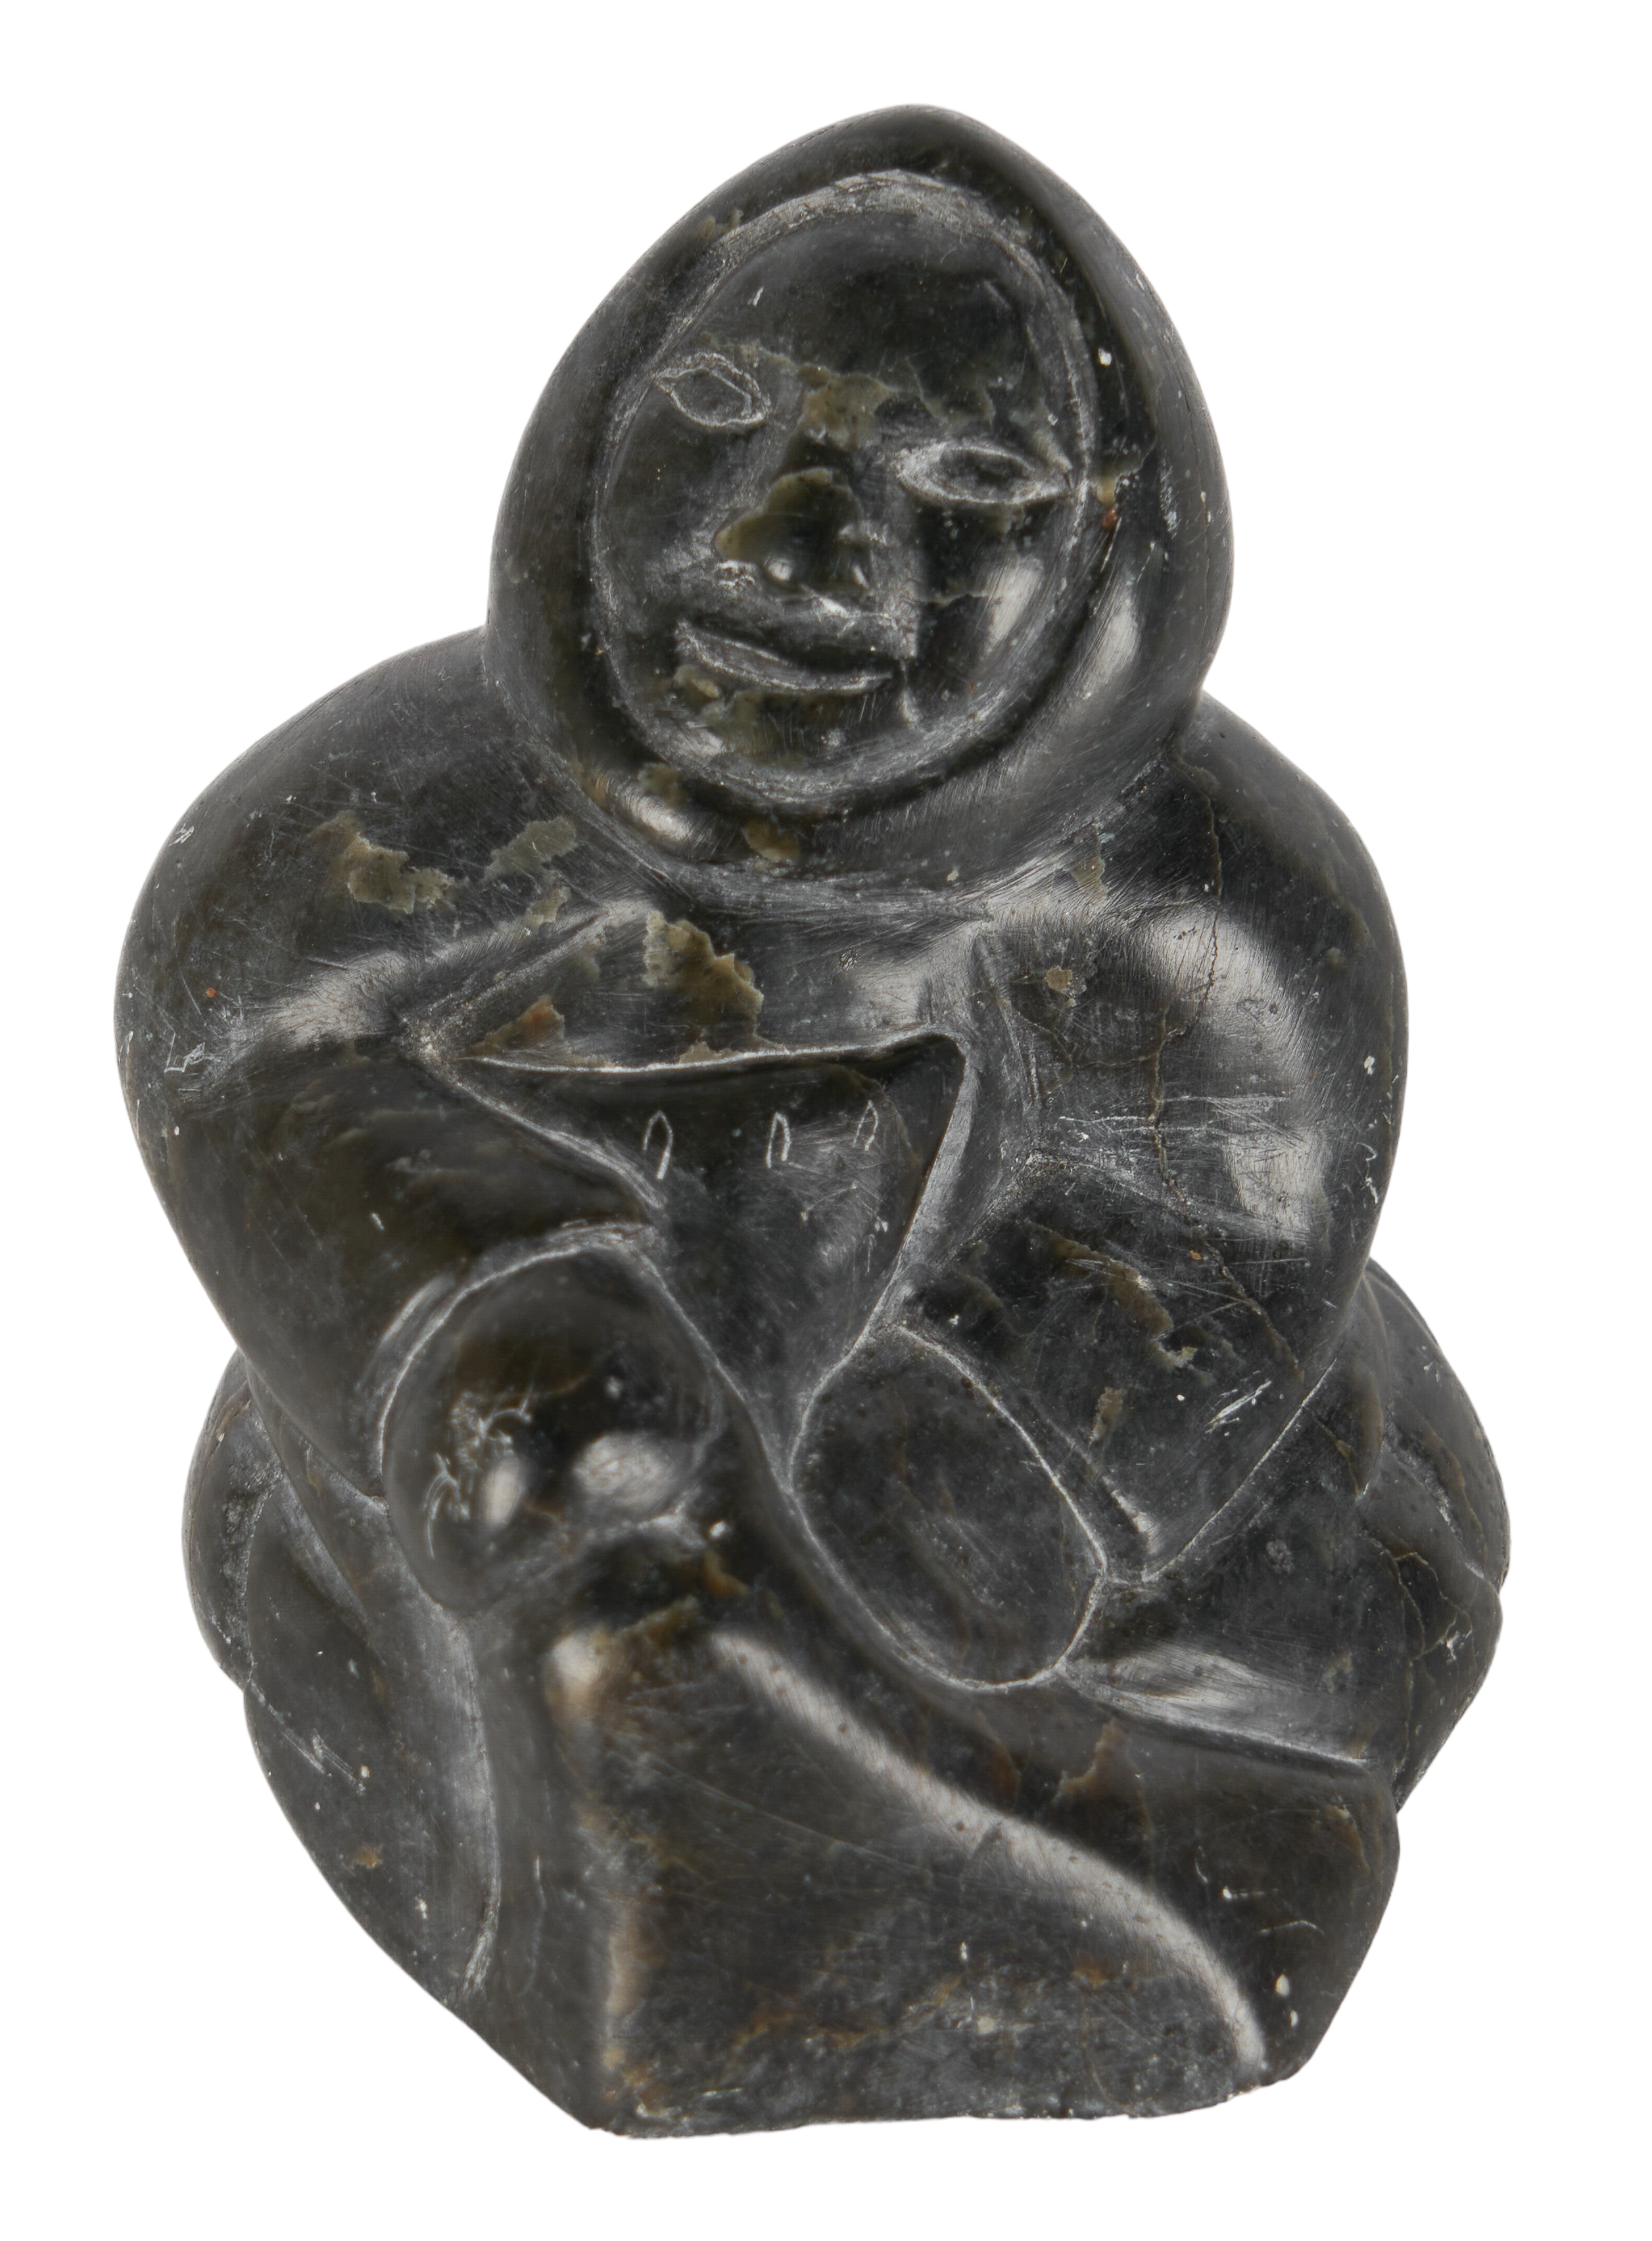 Carved stone Inuit sculpture, seated